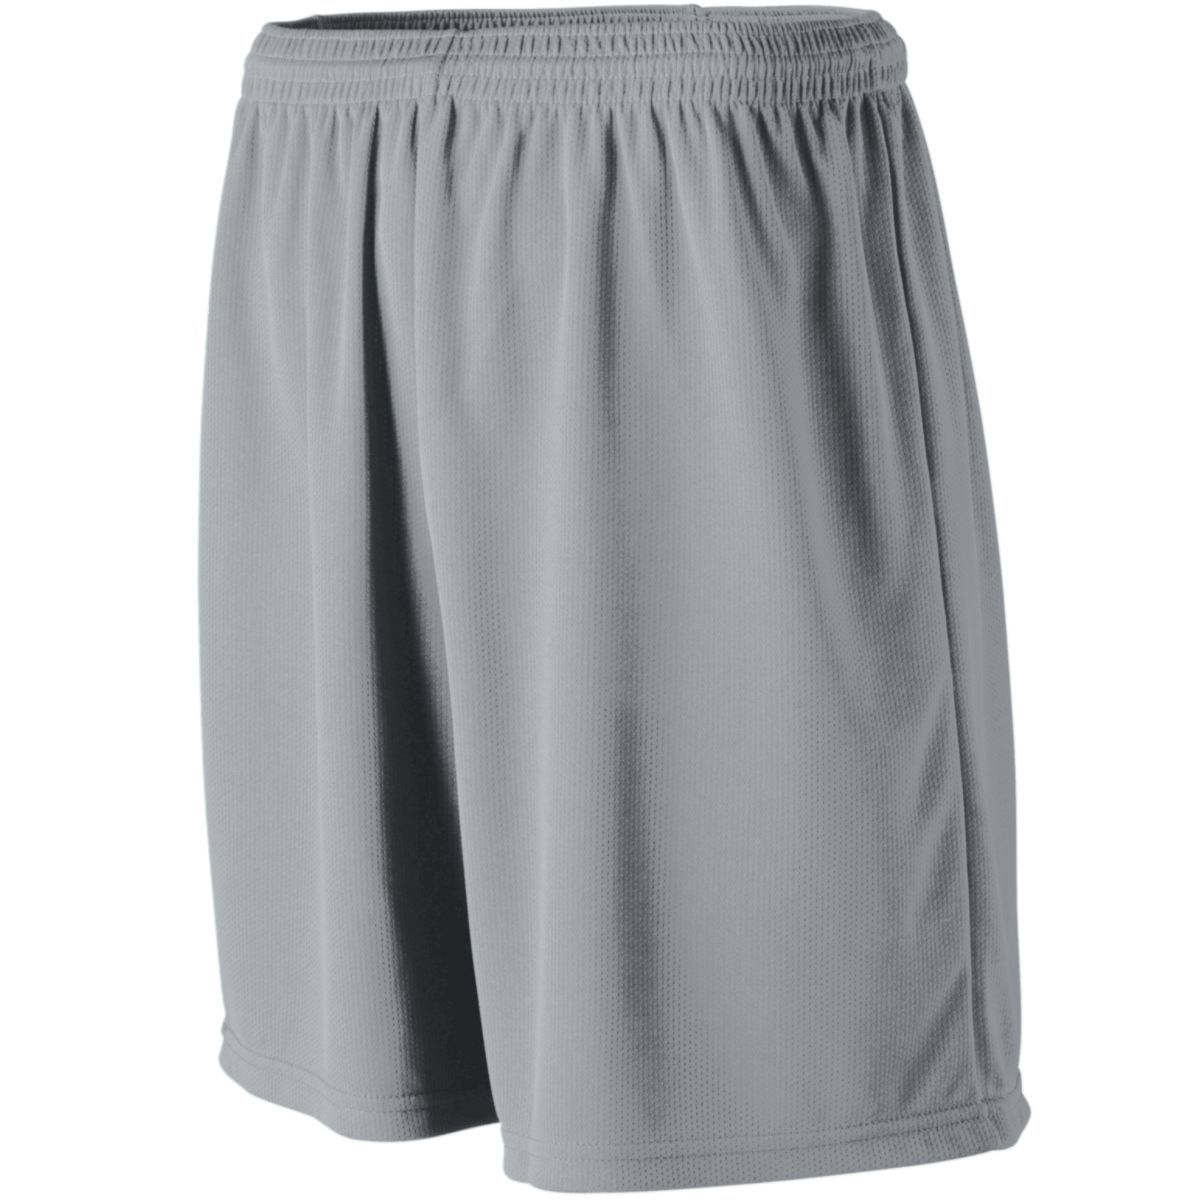 Youth Wicking Mesh Athletic Shorts - 806